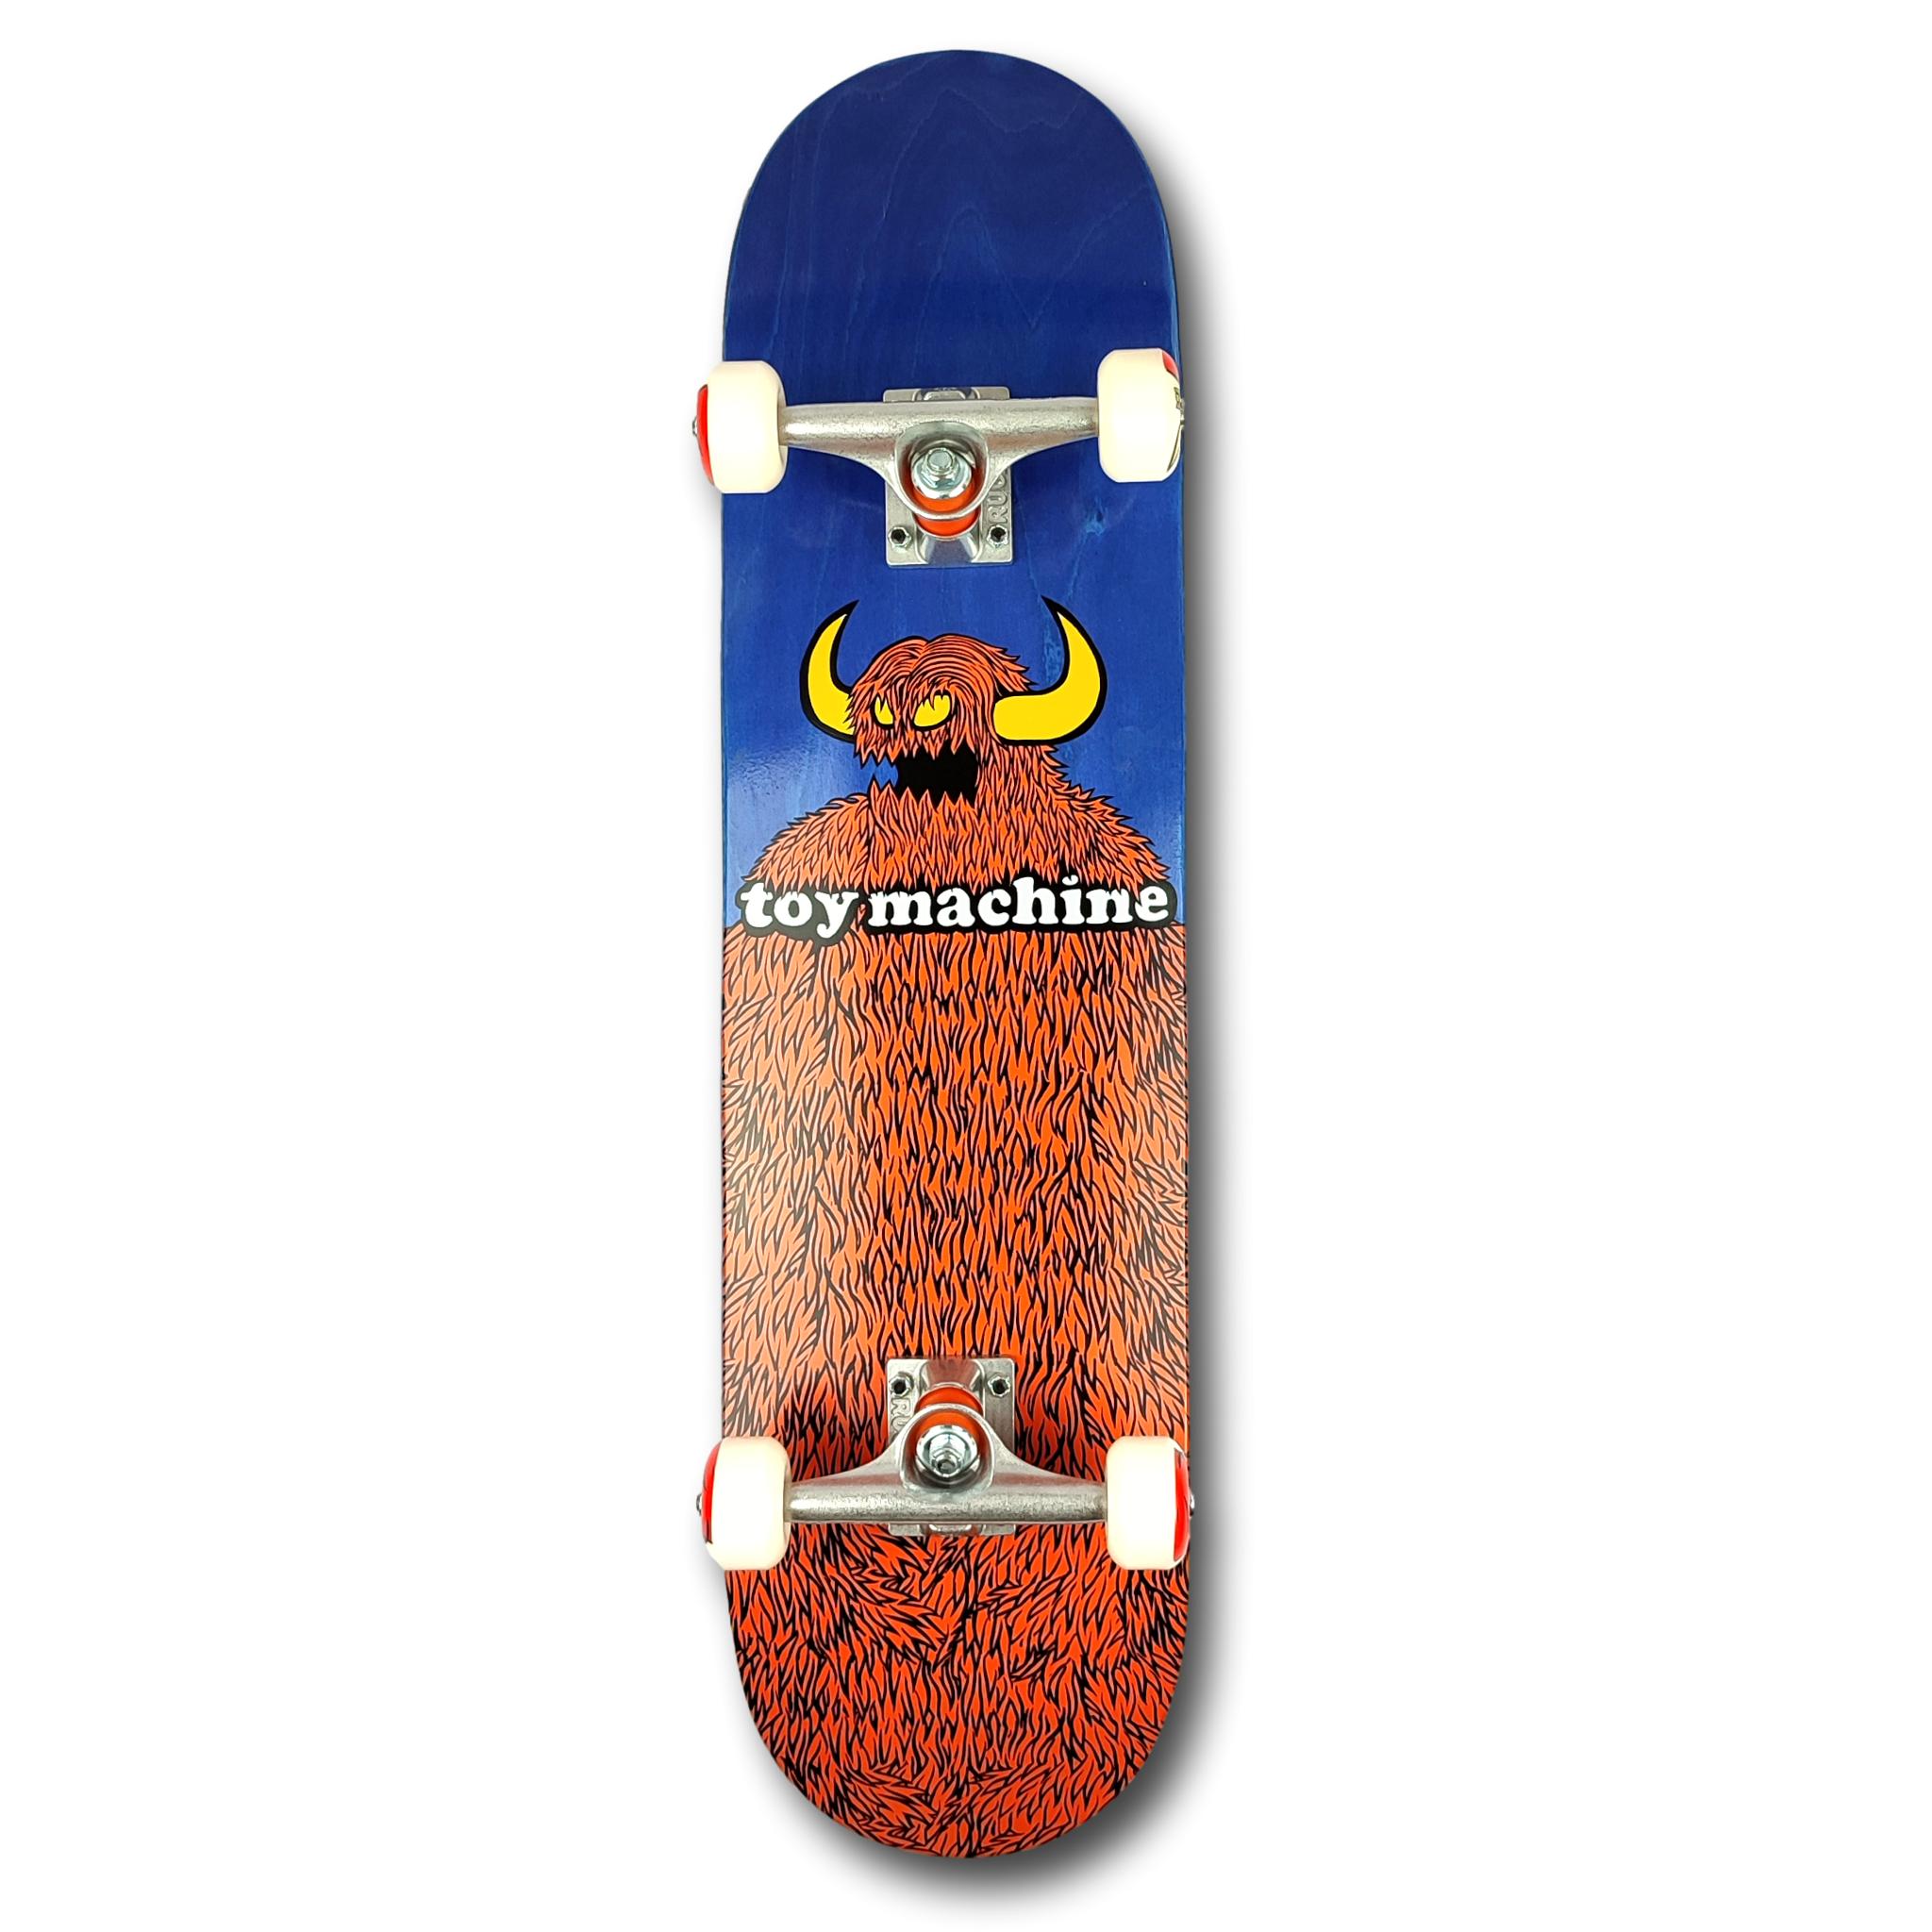 TOY MACHINE BLUE FURRY MONSTER SKATEBOARD COMPLETO 8.0